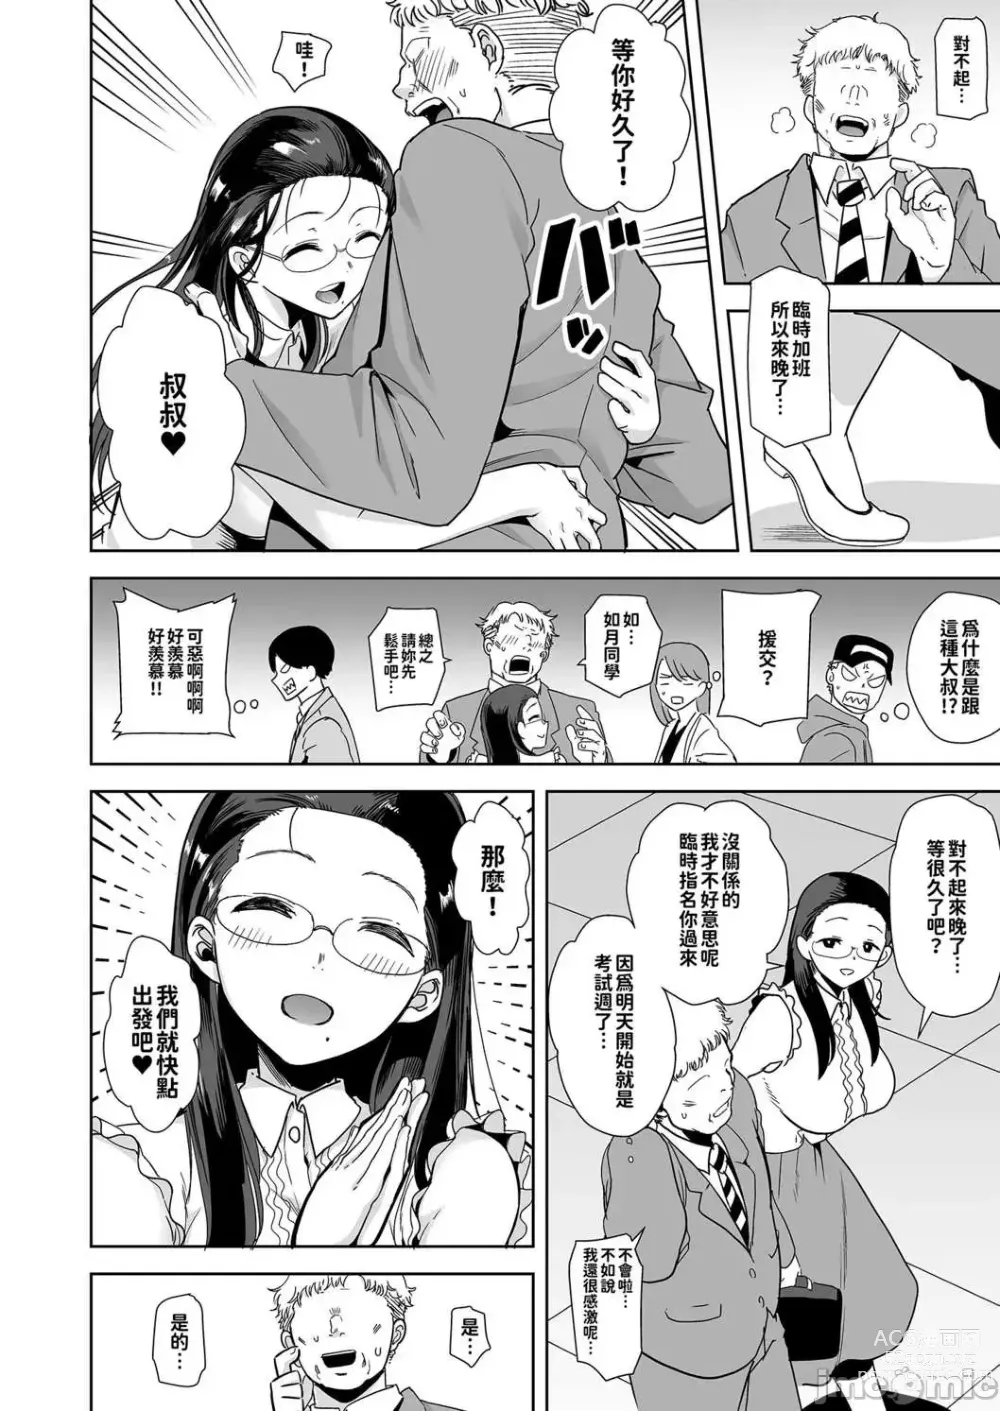 Page 3 of doujinshi Seika Girls Academys Officially Approved Prostitute Man 1 + 2 + 3